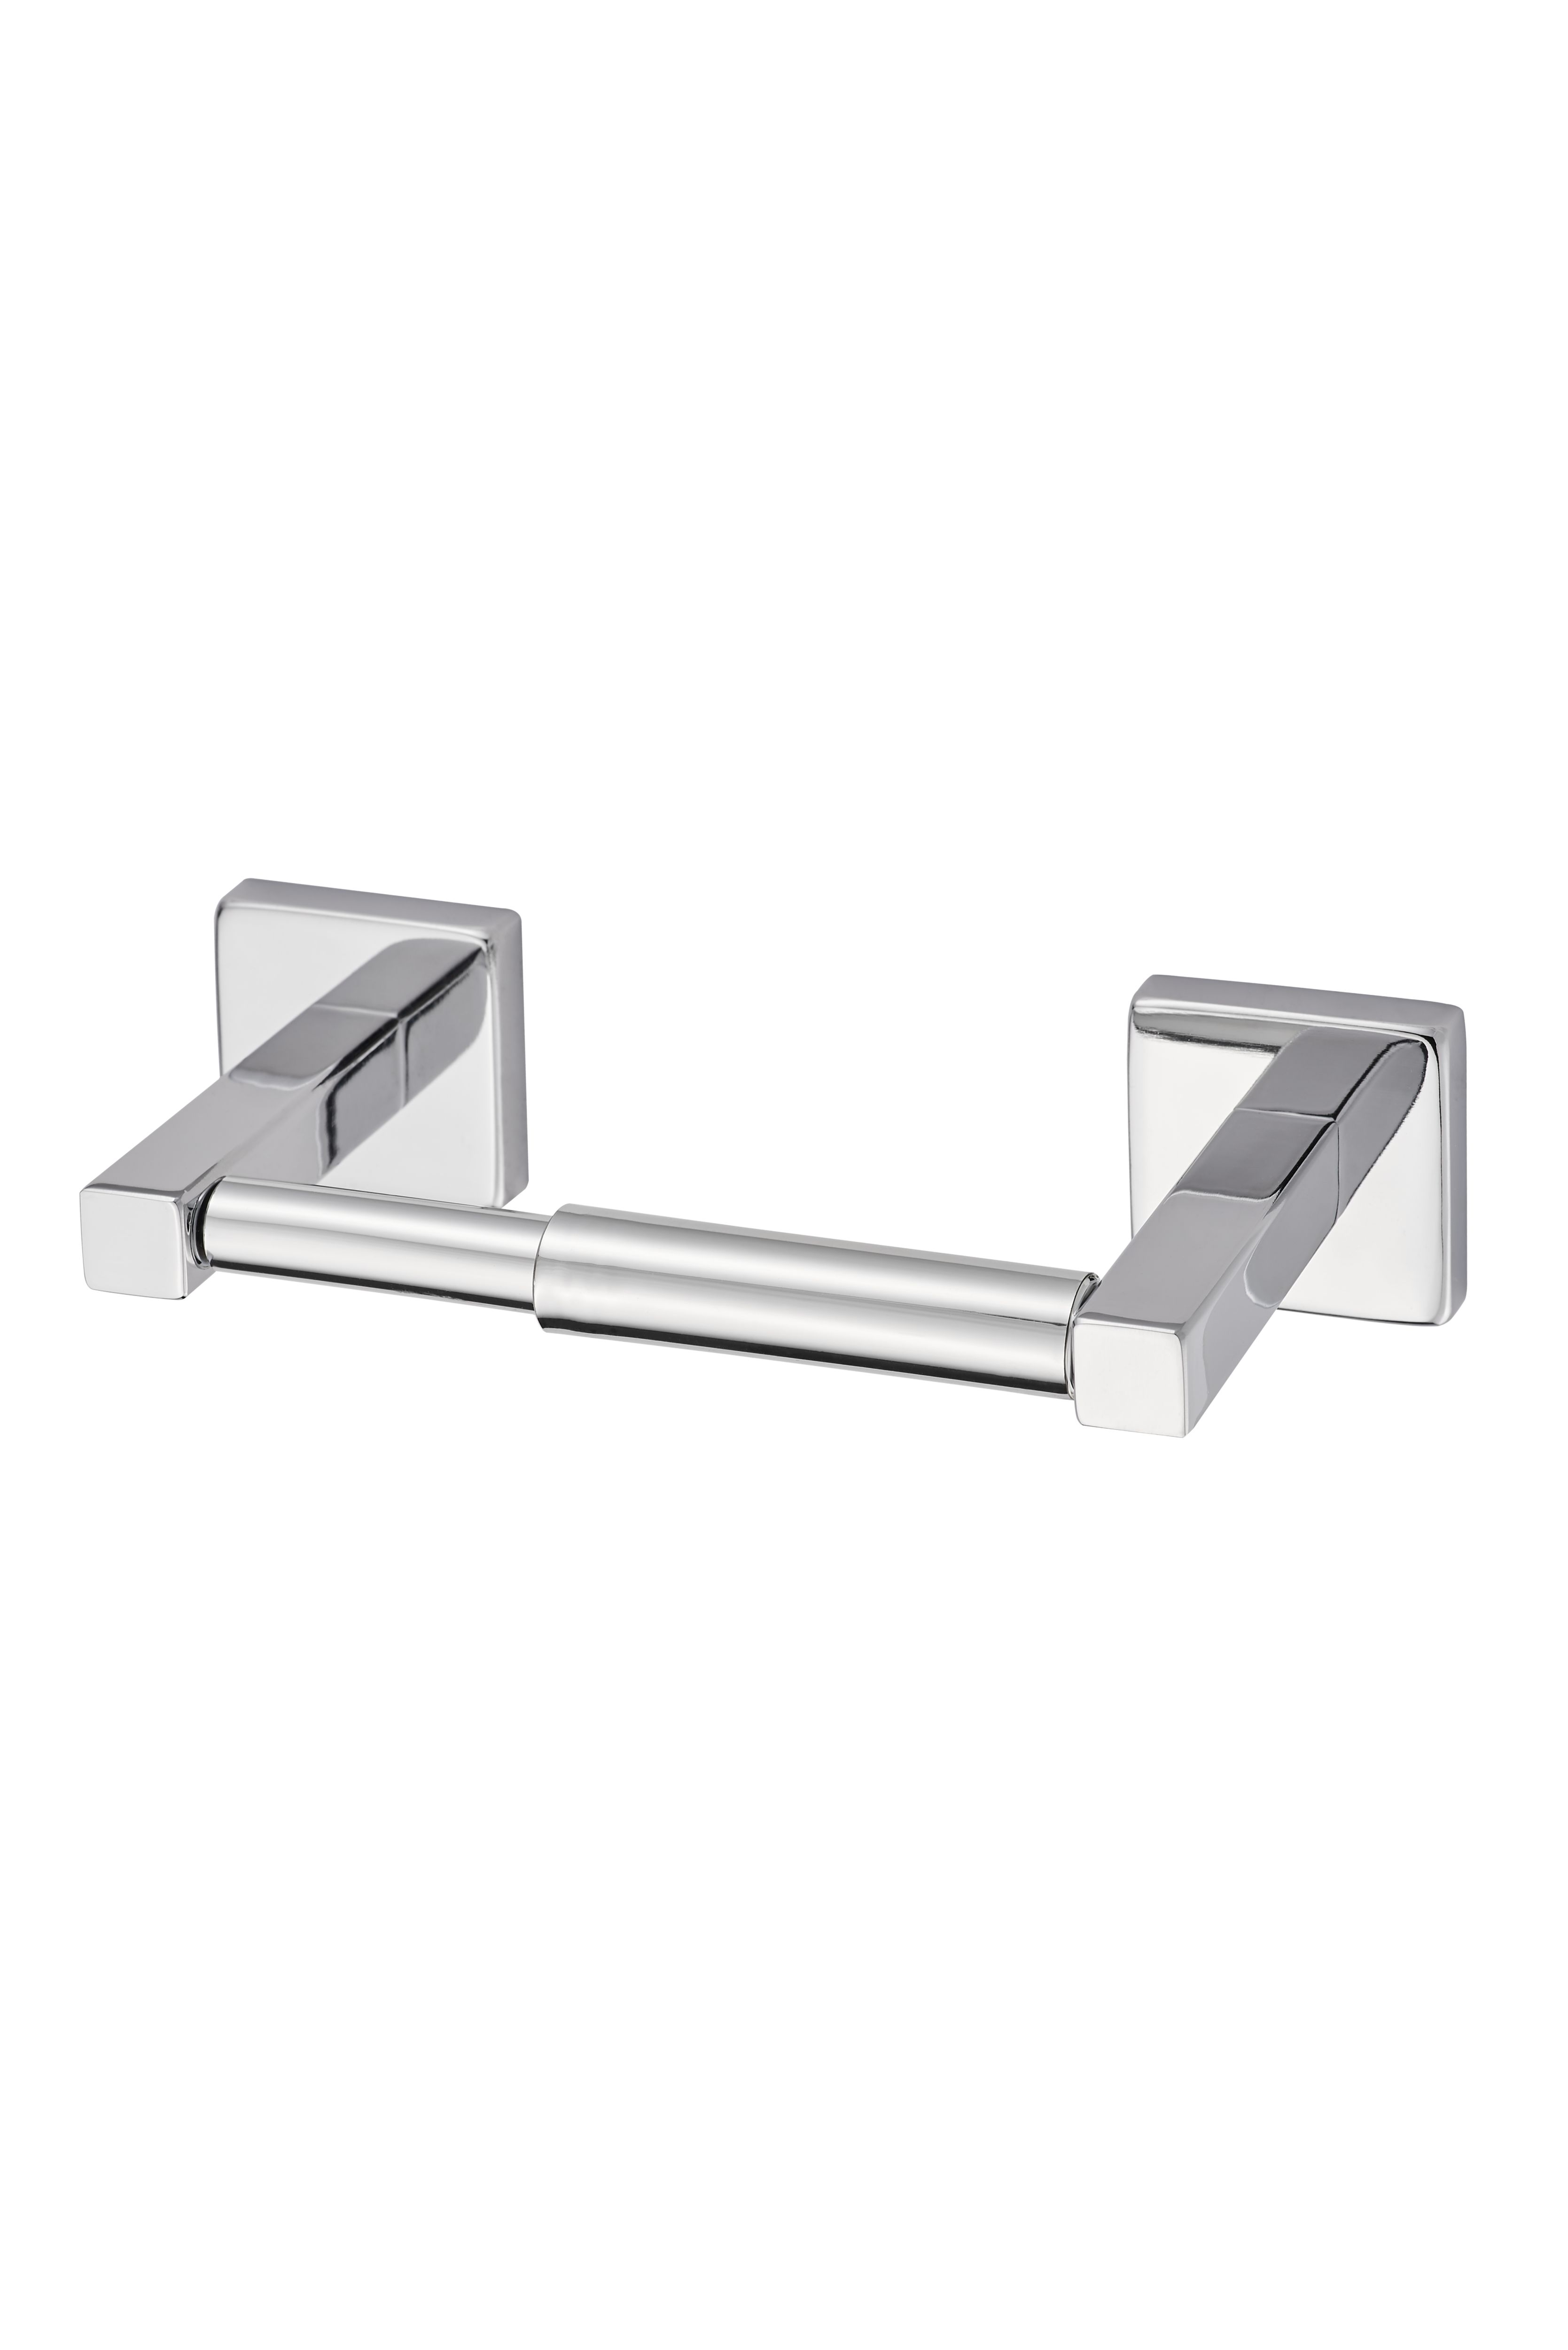 GoodHome Alessano Polished Silver effect Wall-mounted Toilet roll holder (H)52mm (W)215mm